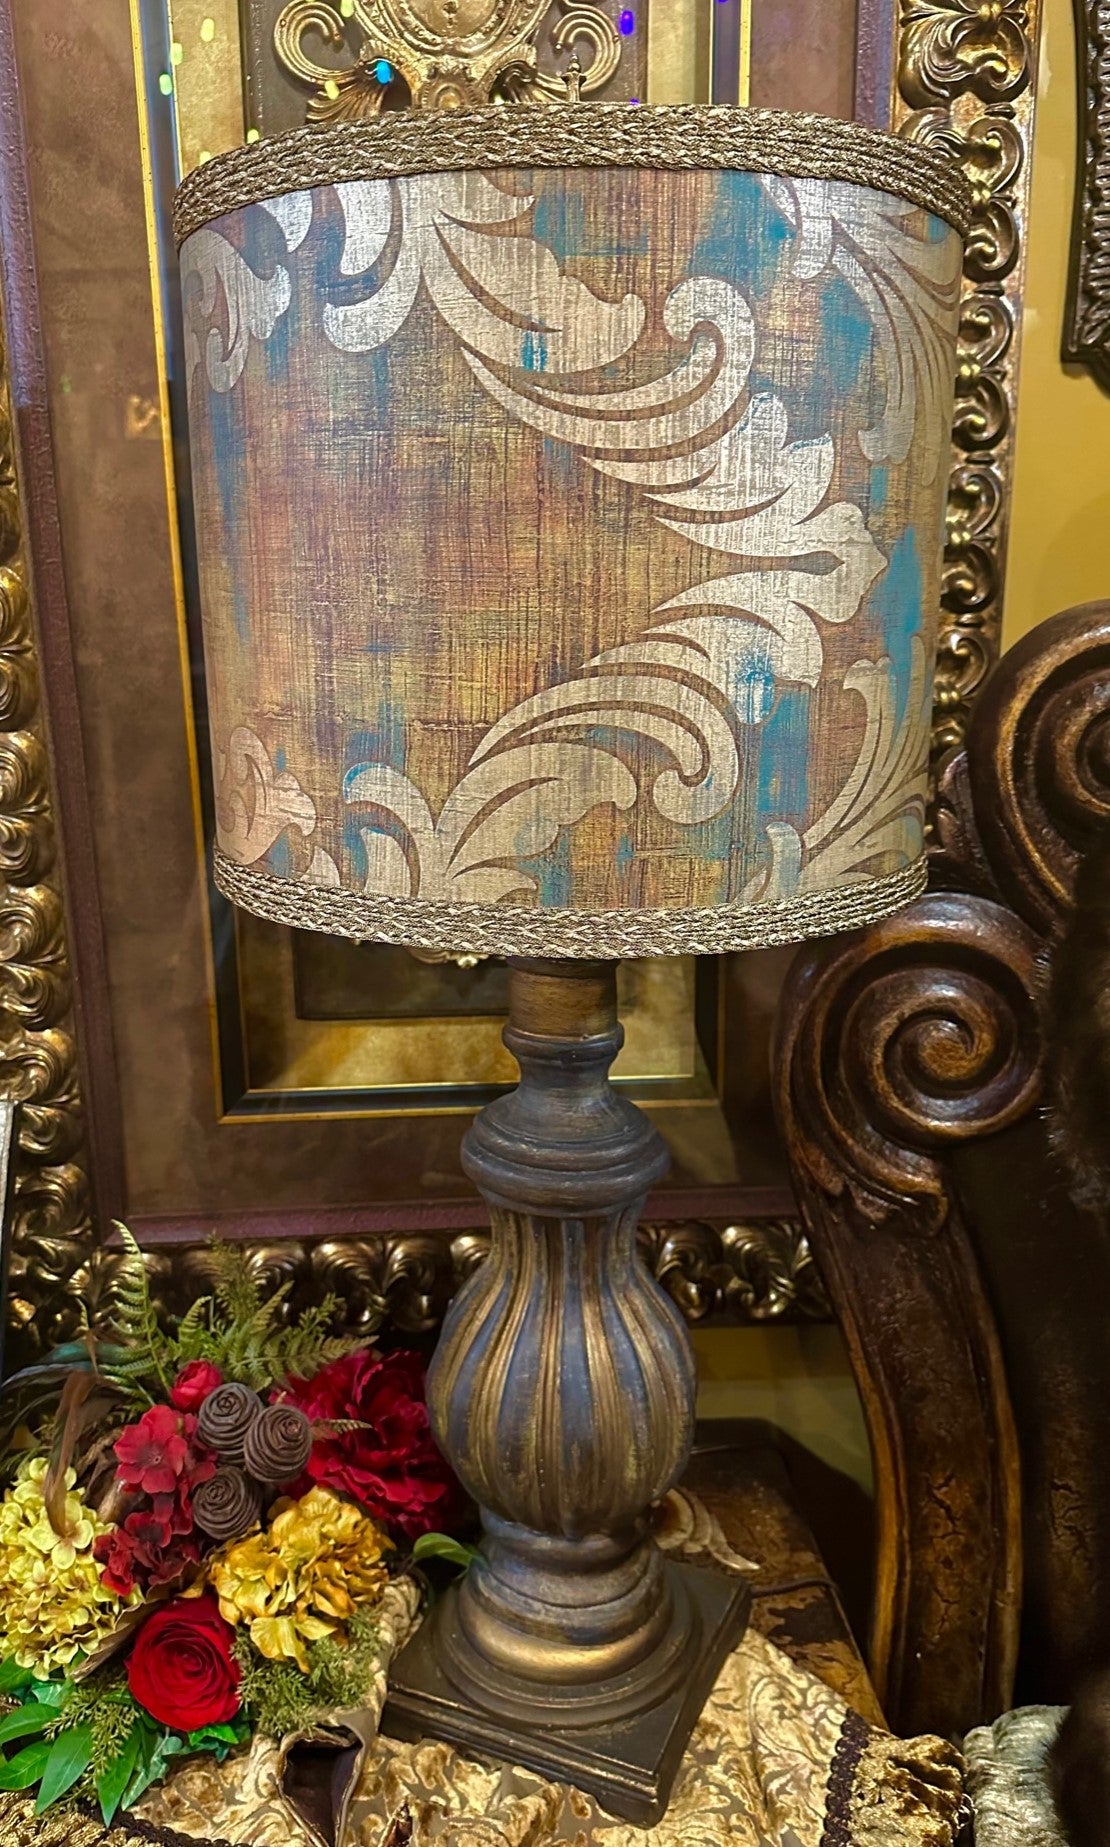 Gallery Designs Table Lamp with Bronze and Turquoise Lamp Shade